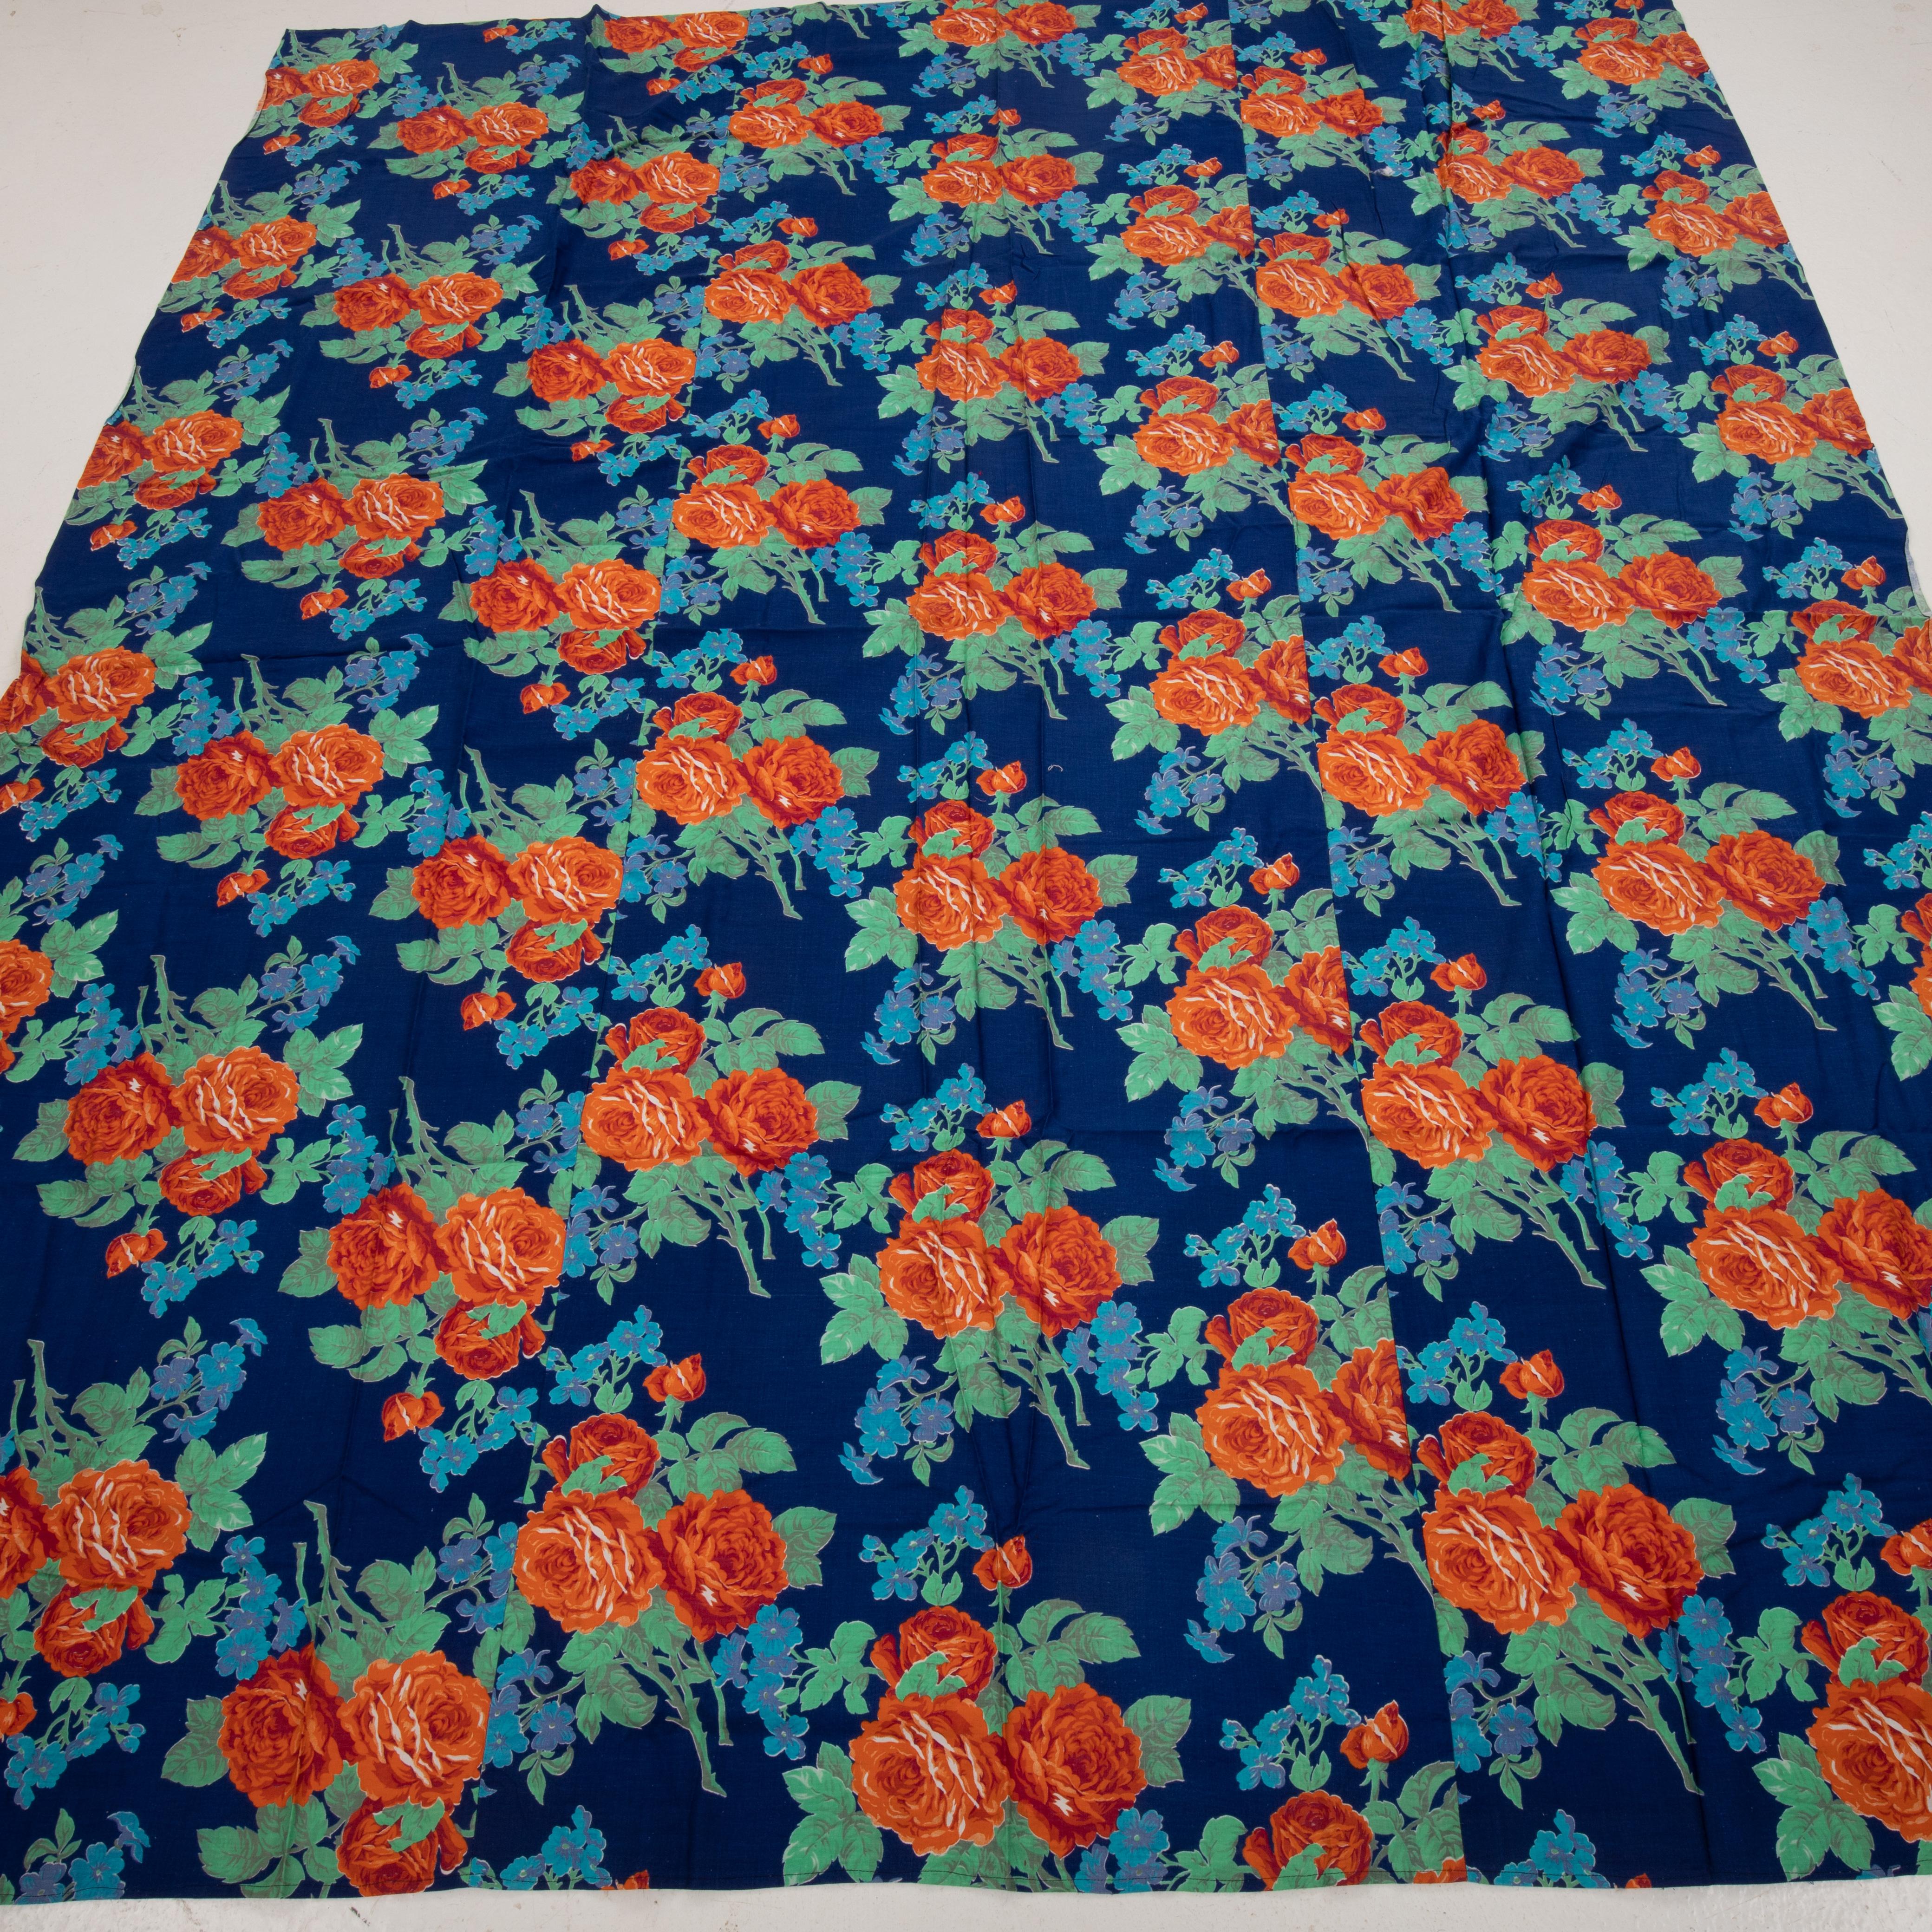 Russian Roller Printed Cotton Panel, Made for Central Asian Markets  Mid 20th C.  Russia For Sale